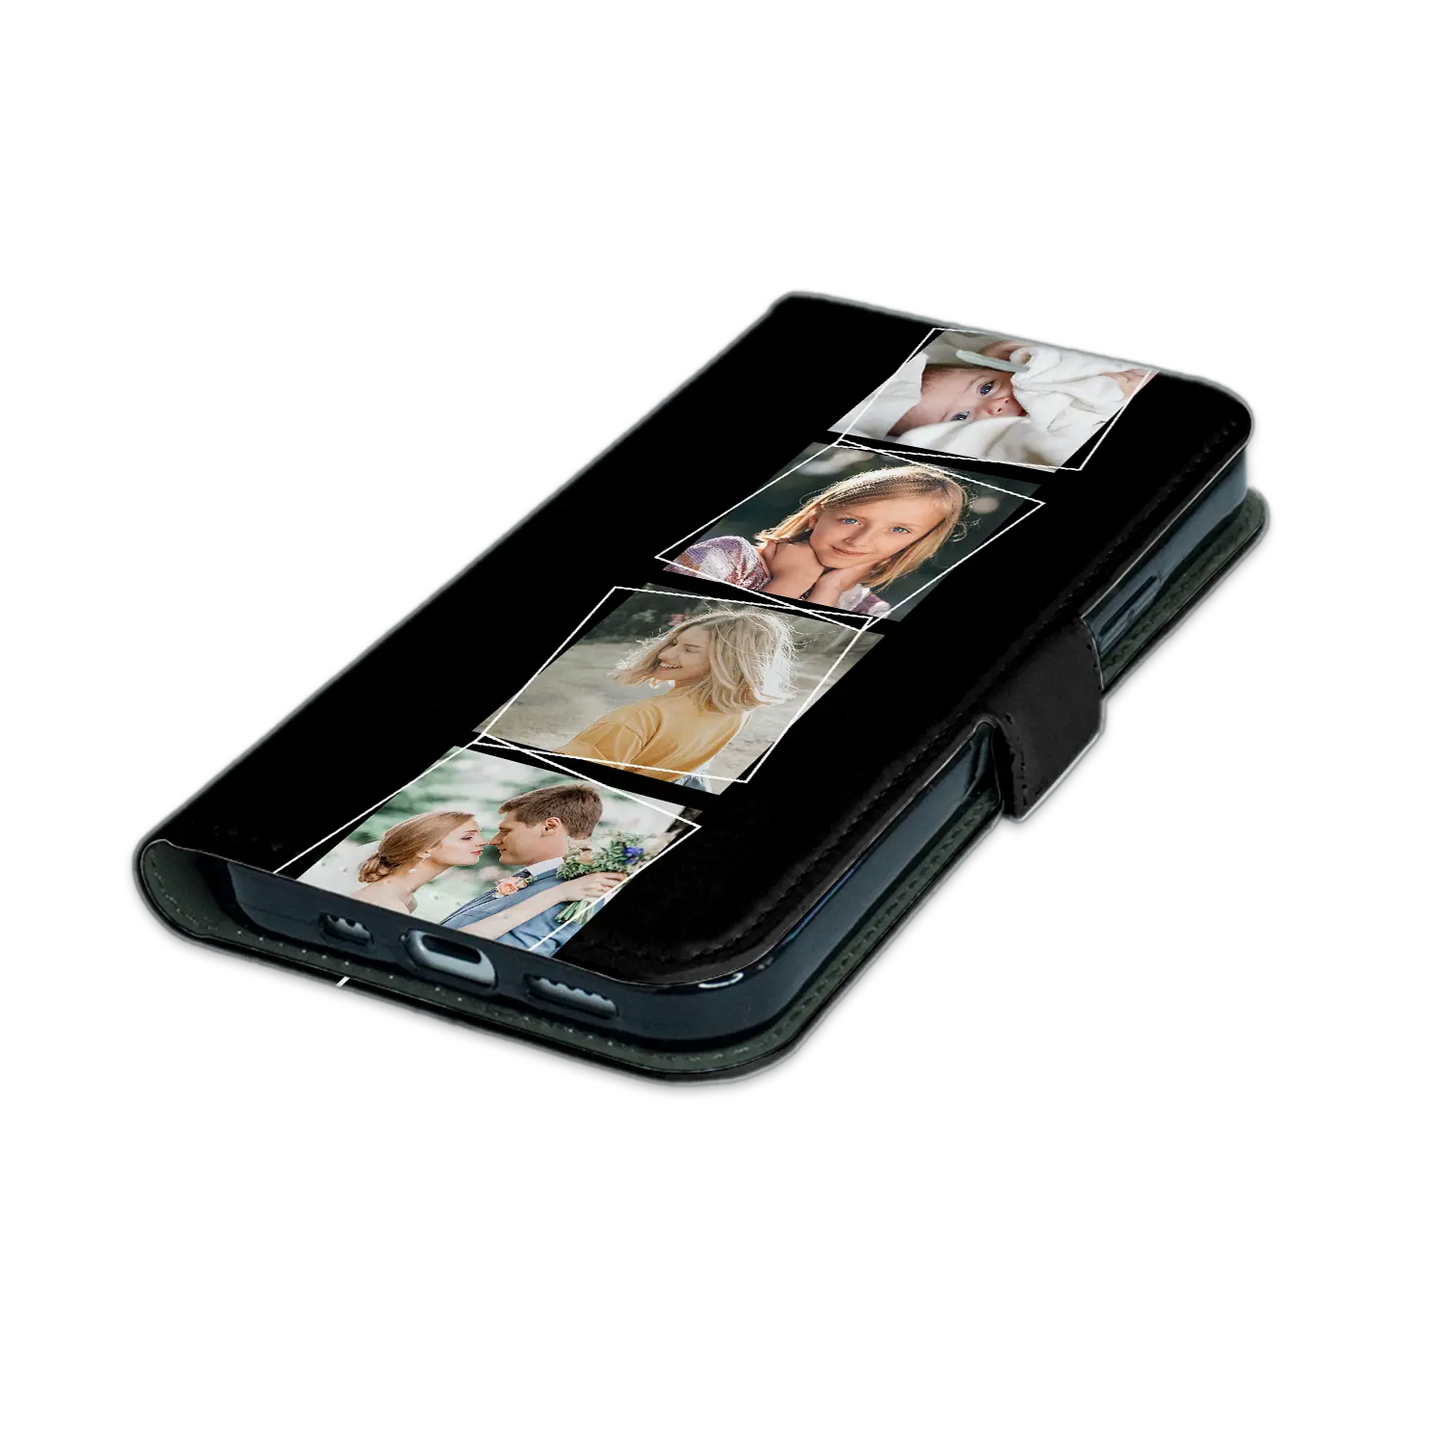 Moments - Personalised Galaxy S Case